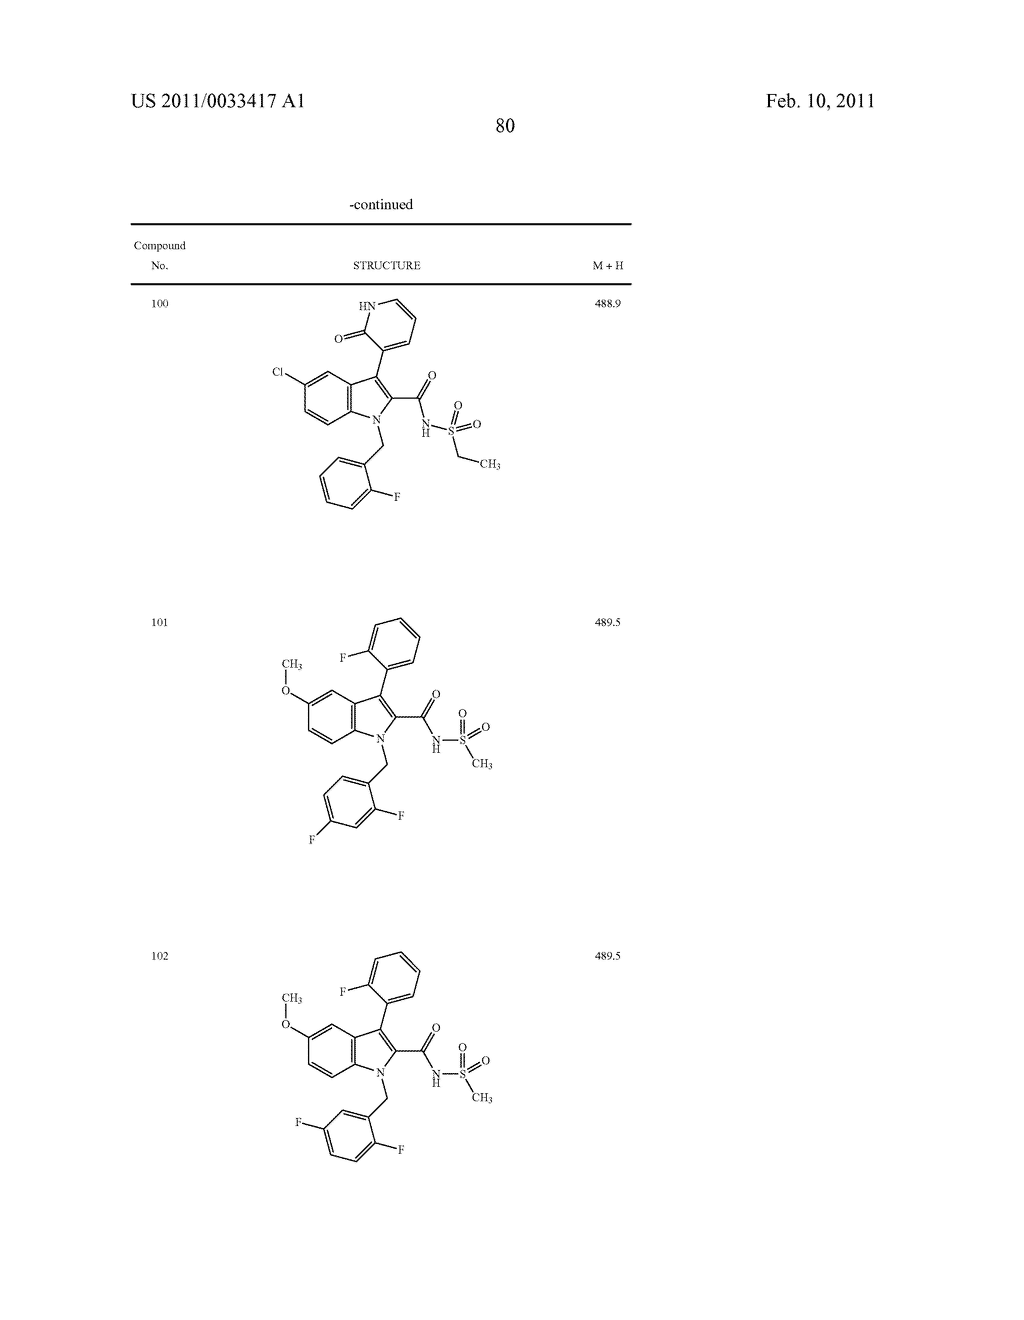 2,3-SUBSTITUTED INDOLE DERIVATIVES FOR TREATING VIRAL INFECTIONS - diagram, schematic, and image 81